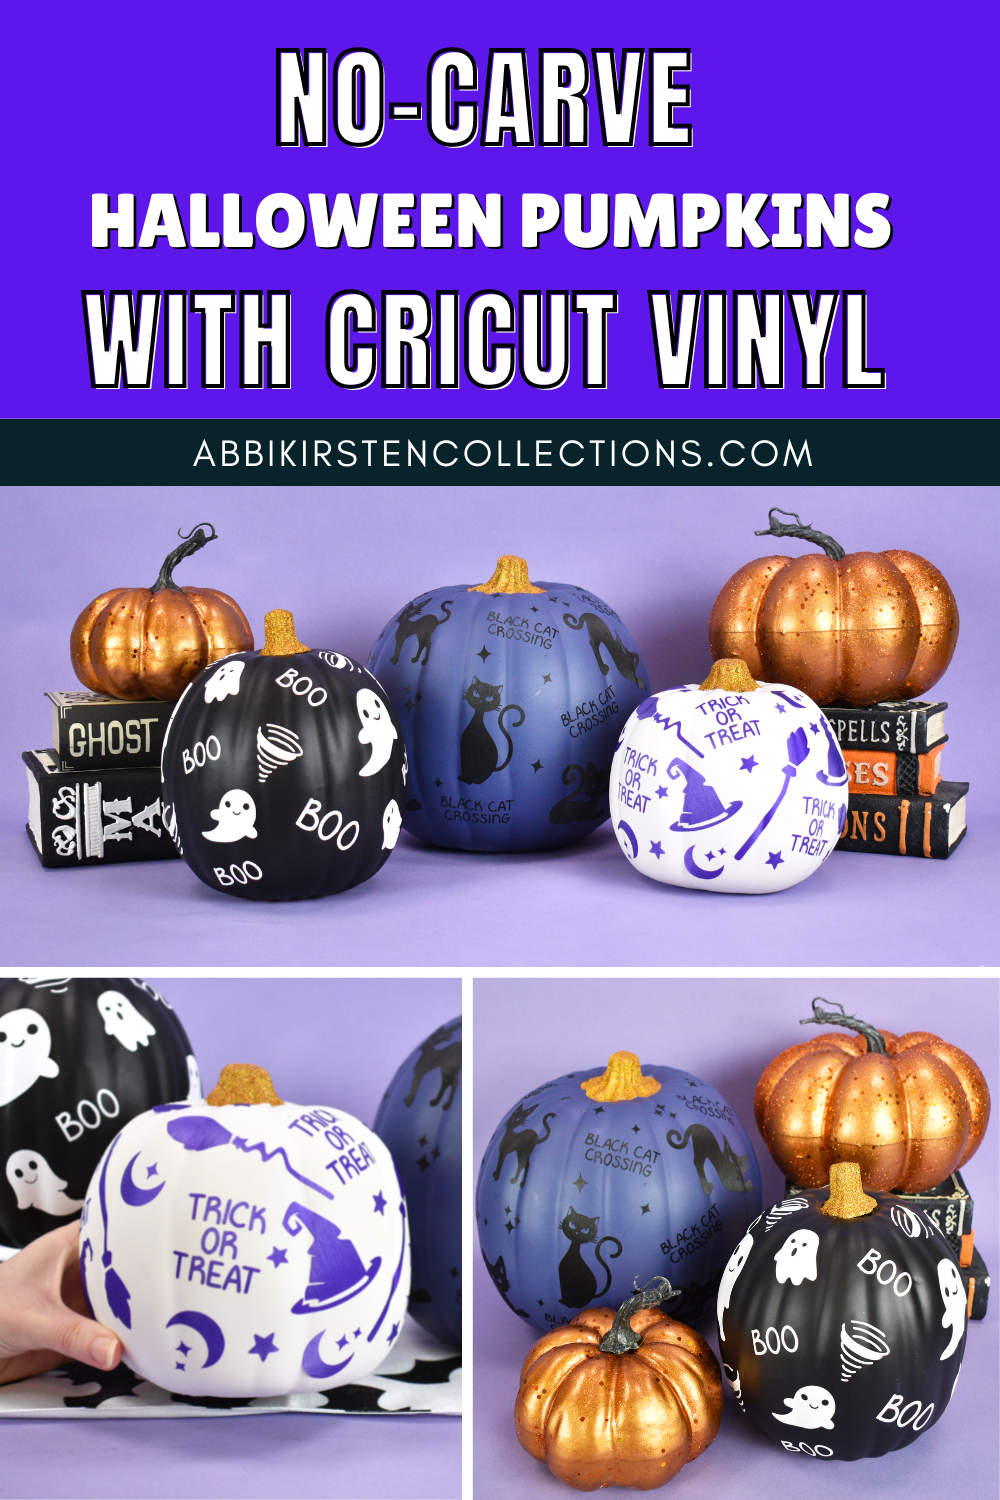 A collage of images of no-carve painted, decorated Halloween pumpkins with vinyl cut outs. Text overlayed on a blue background says "no-carve Halloween Pumpkins with Cricut Vinyl"